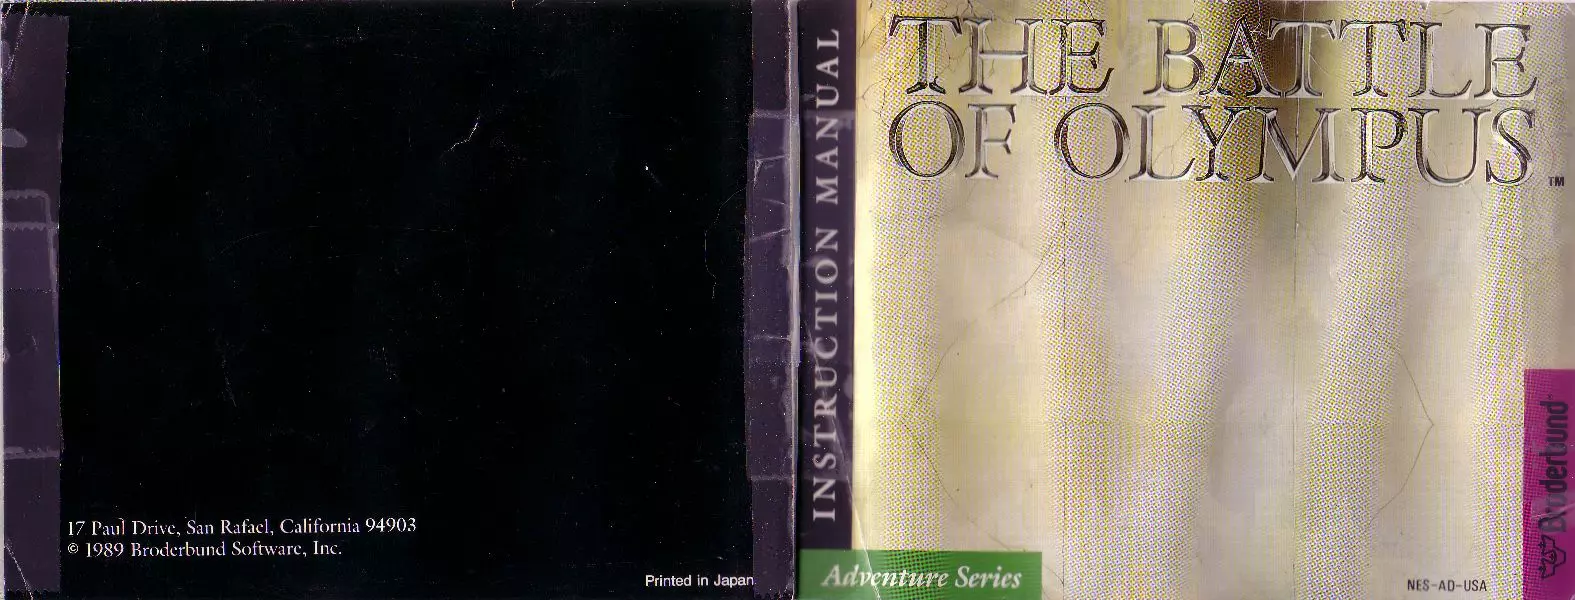 manual for Battle of Olympus, The